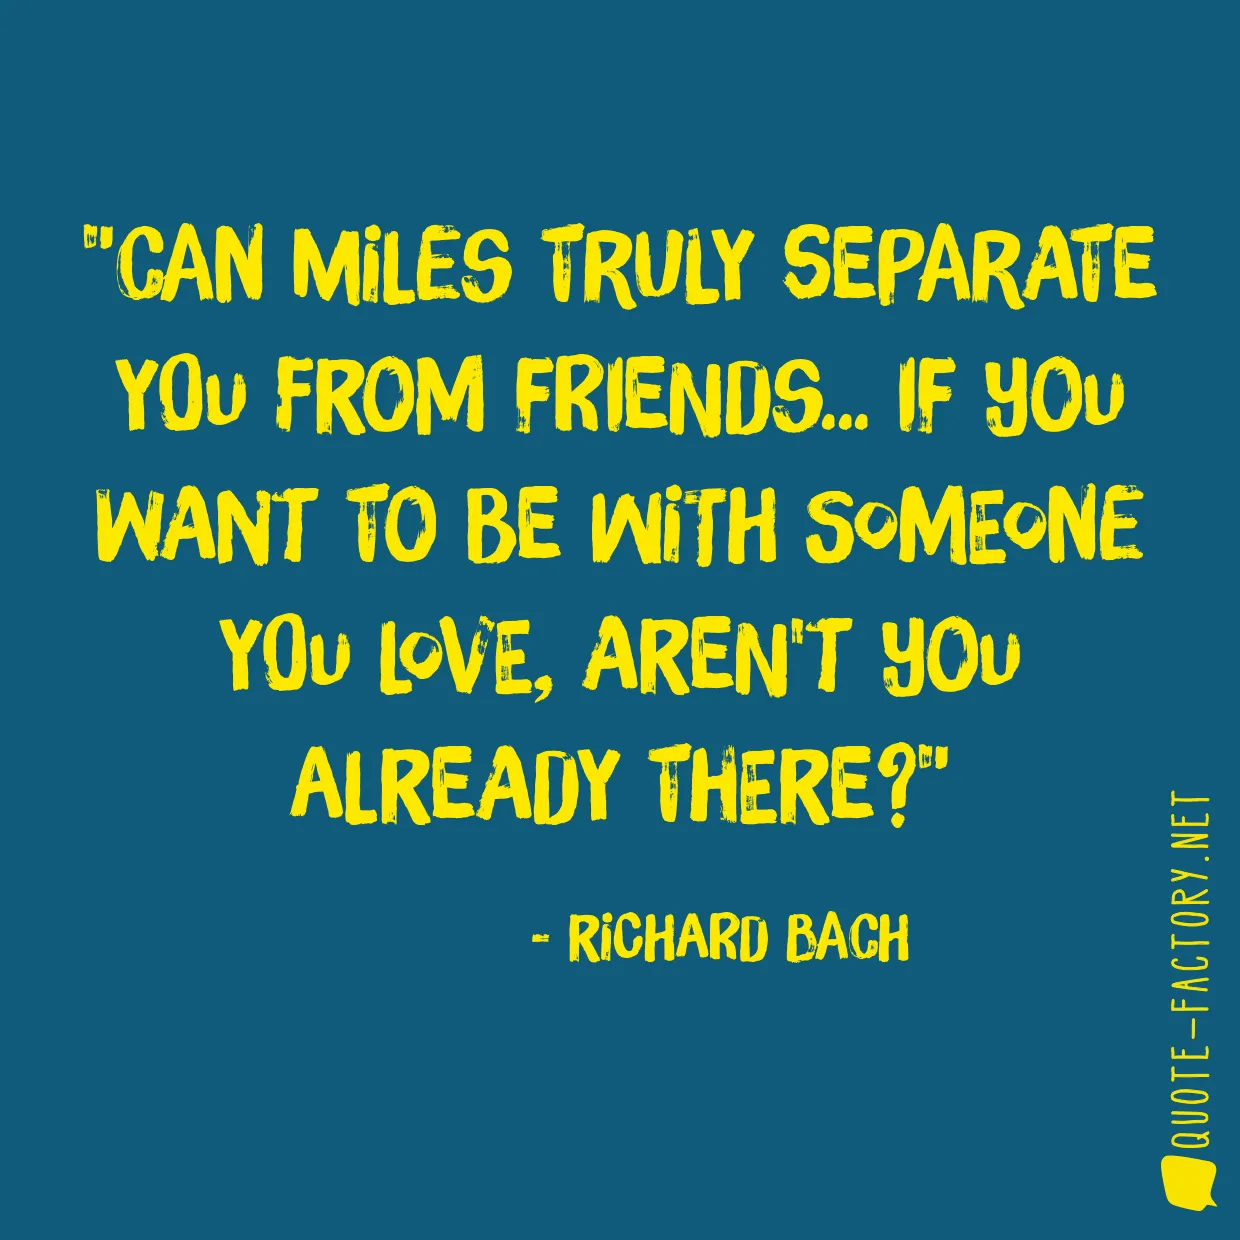 Can miles truly separate you from friends... If you want to be with someone you love, aren't you already there?